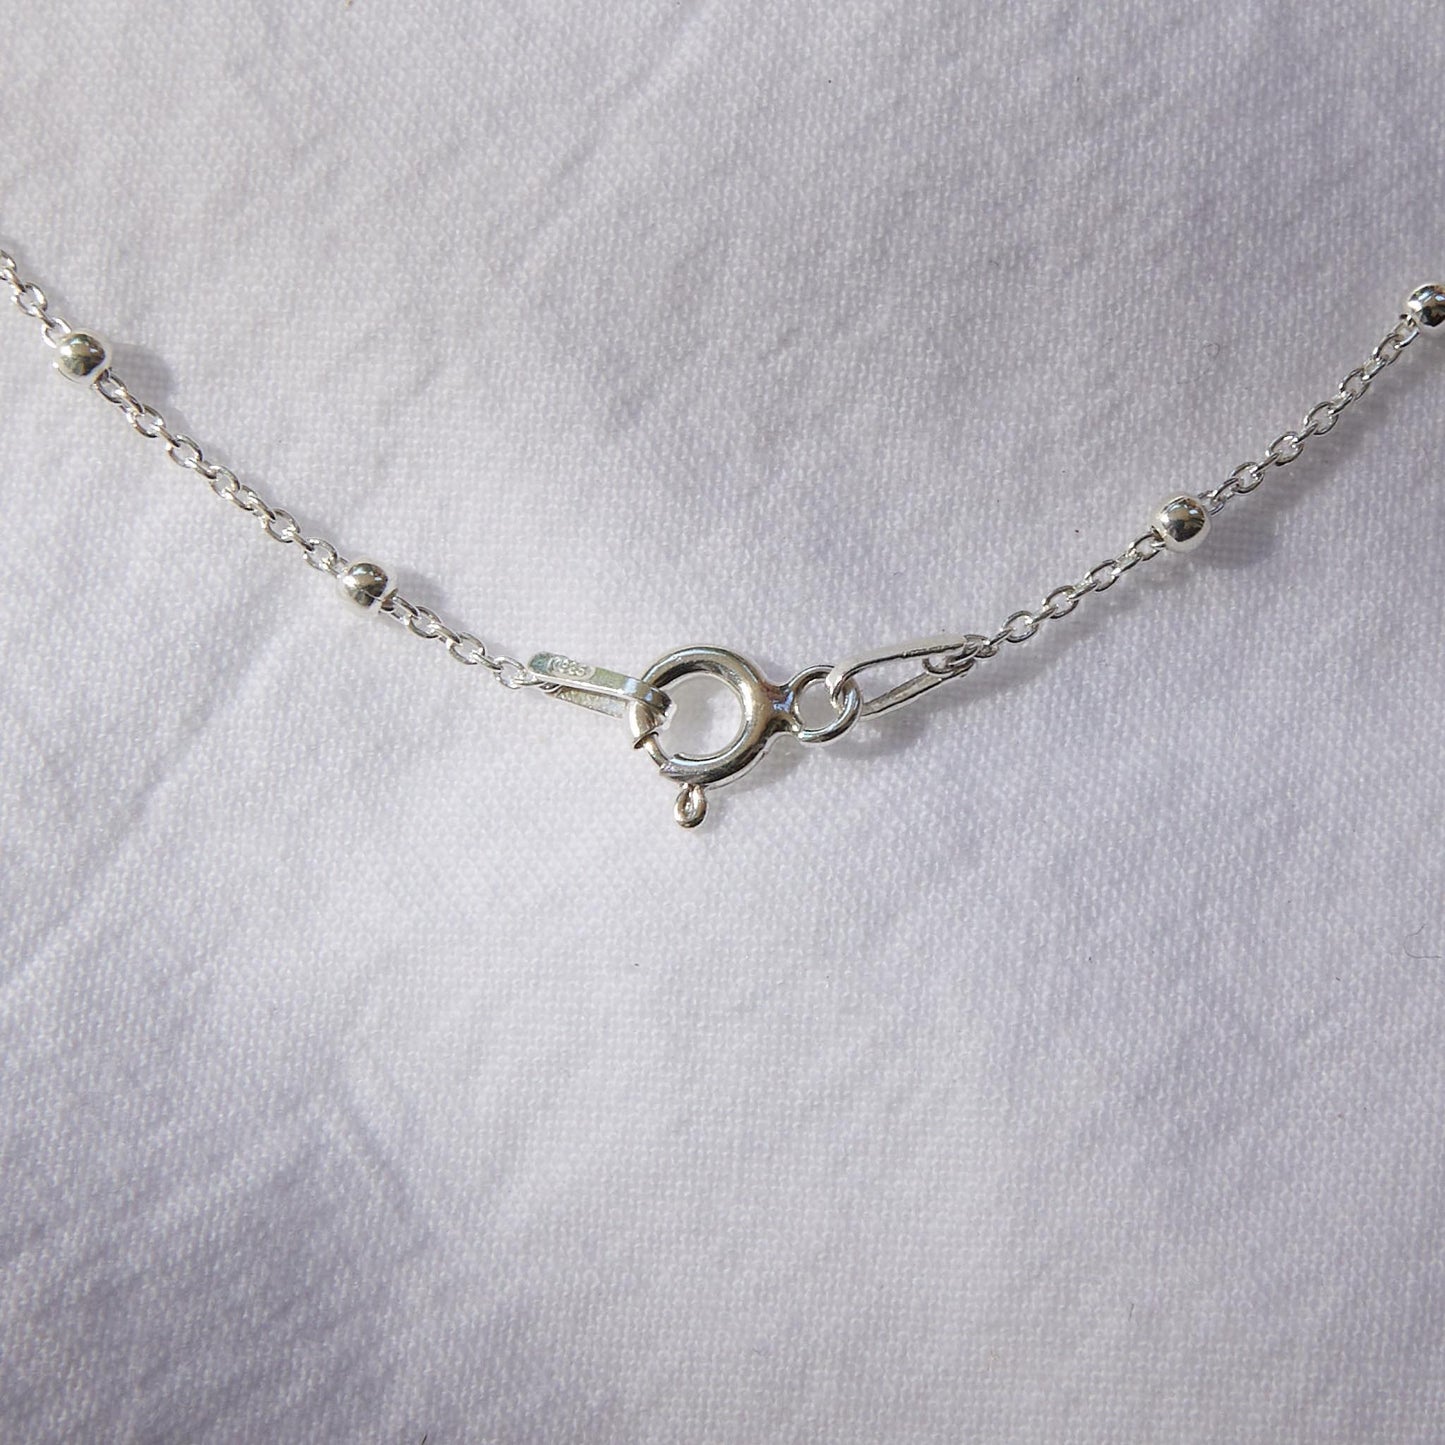 Square palm tree on sterling silver ball chain